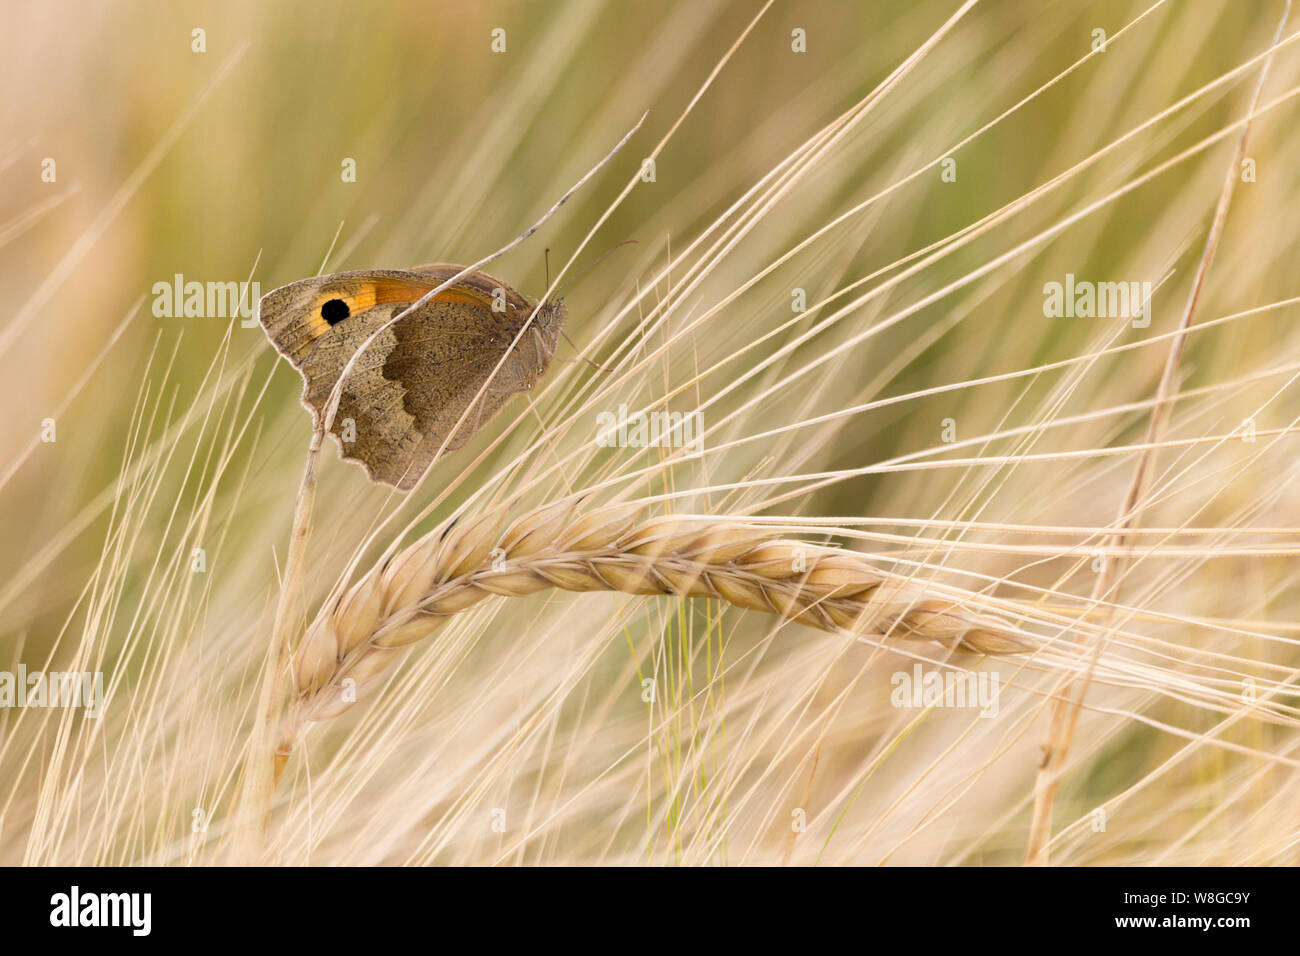 Meadow brown butterfly (Maniola jurtina) female on barley part obscured makes artistic nature image. Black false eye on orange brown and grey wings. Stock Photo